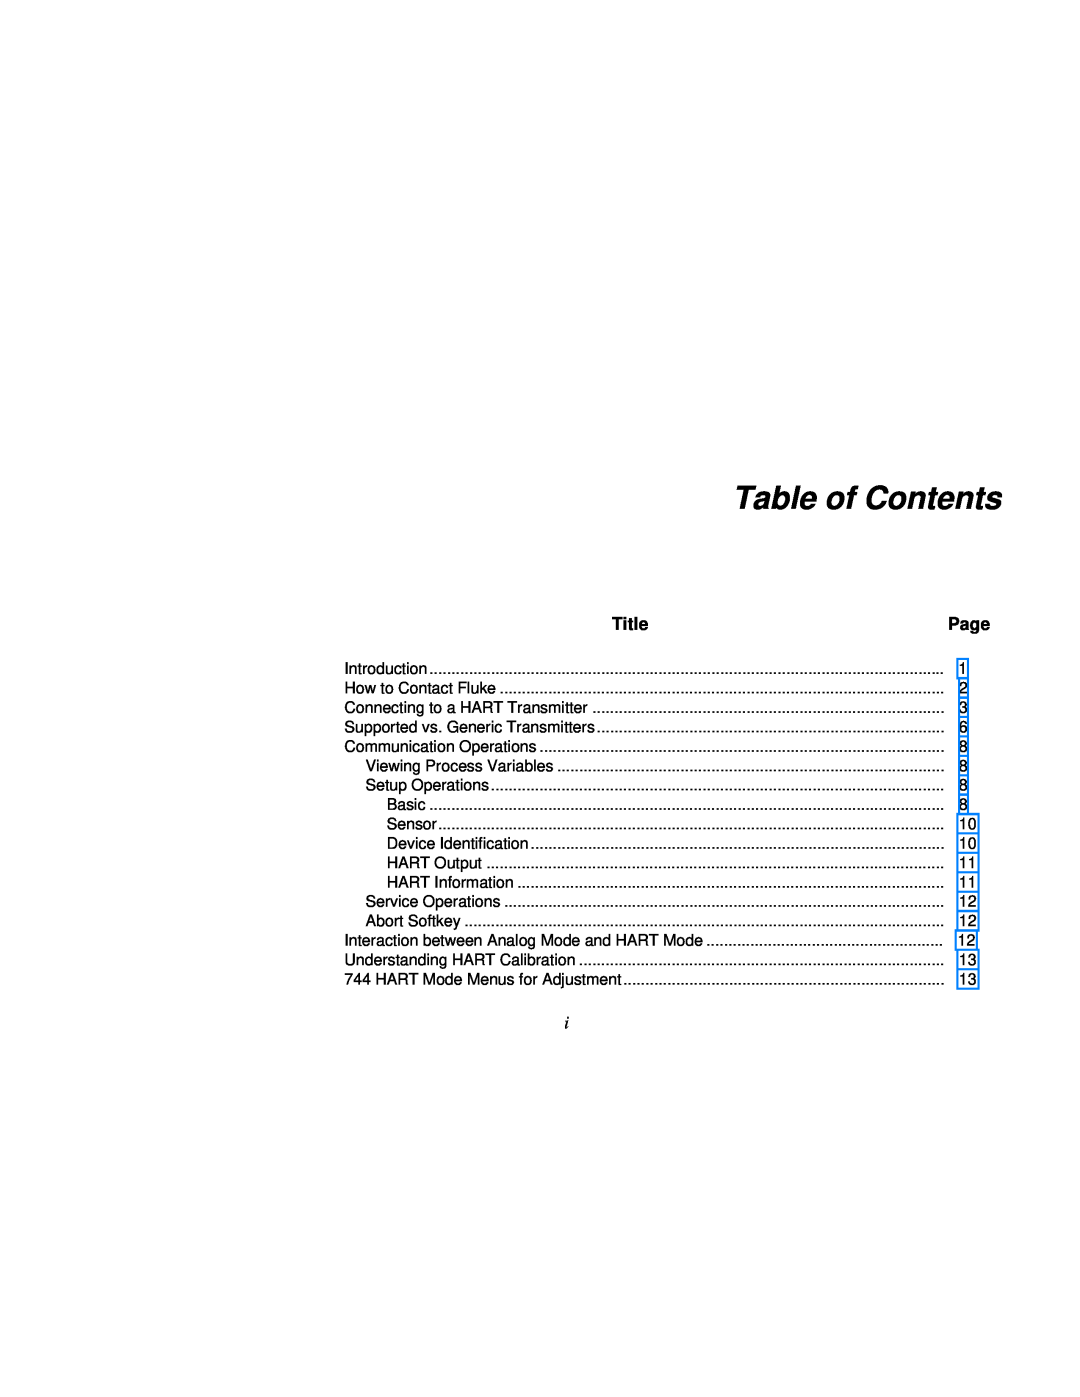 Fluke 744 manual Table of Contents, Title, Page 